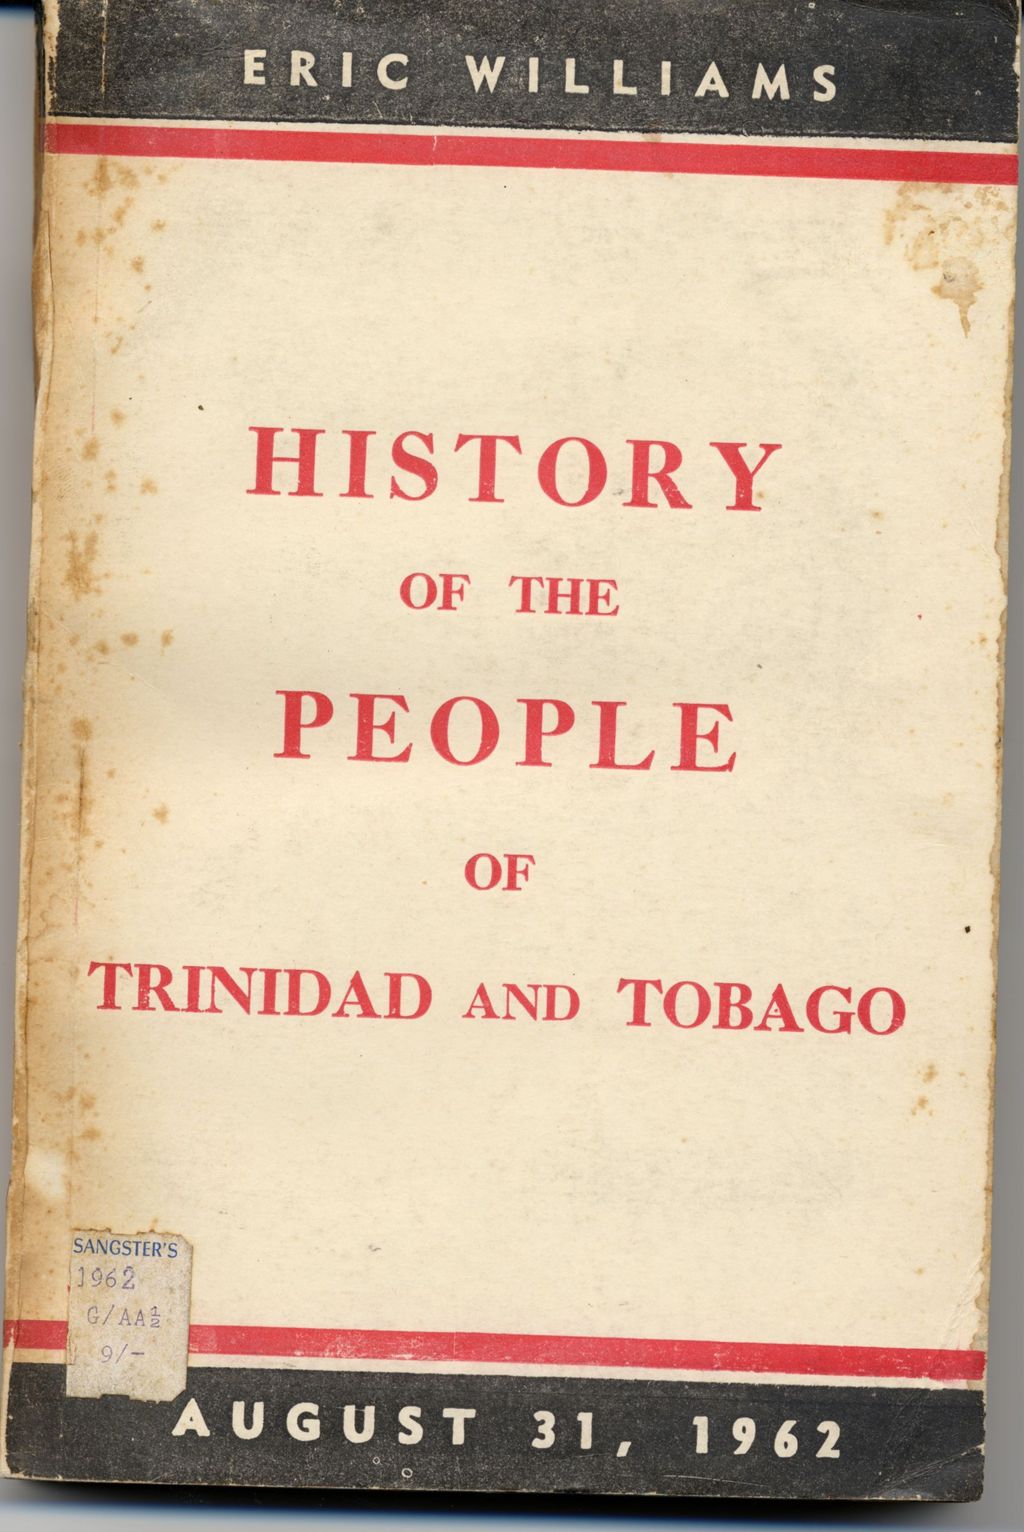 History of the people of Trinidad and Tobago